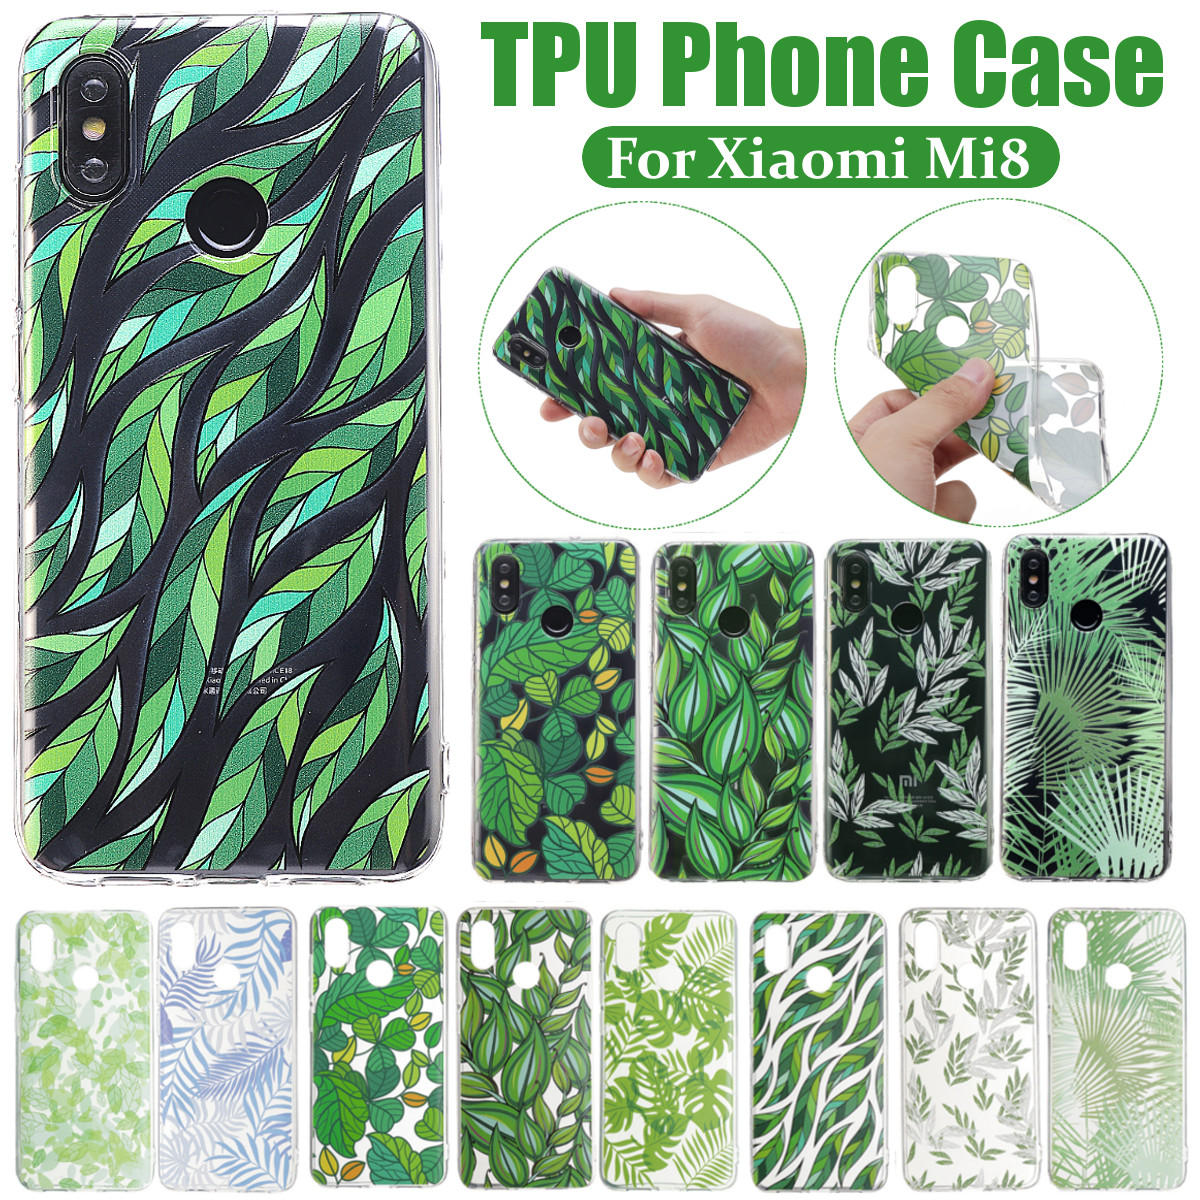 Bakeey Colorful Plant Pattern Translucent Soft TPU Protective Case for Xiaomi Mi 8 Non-original